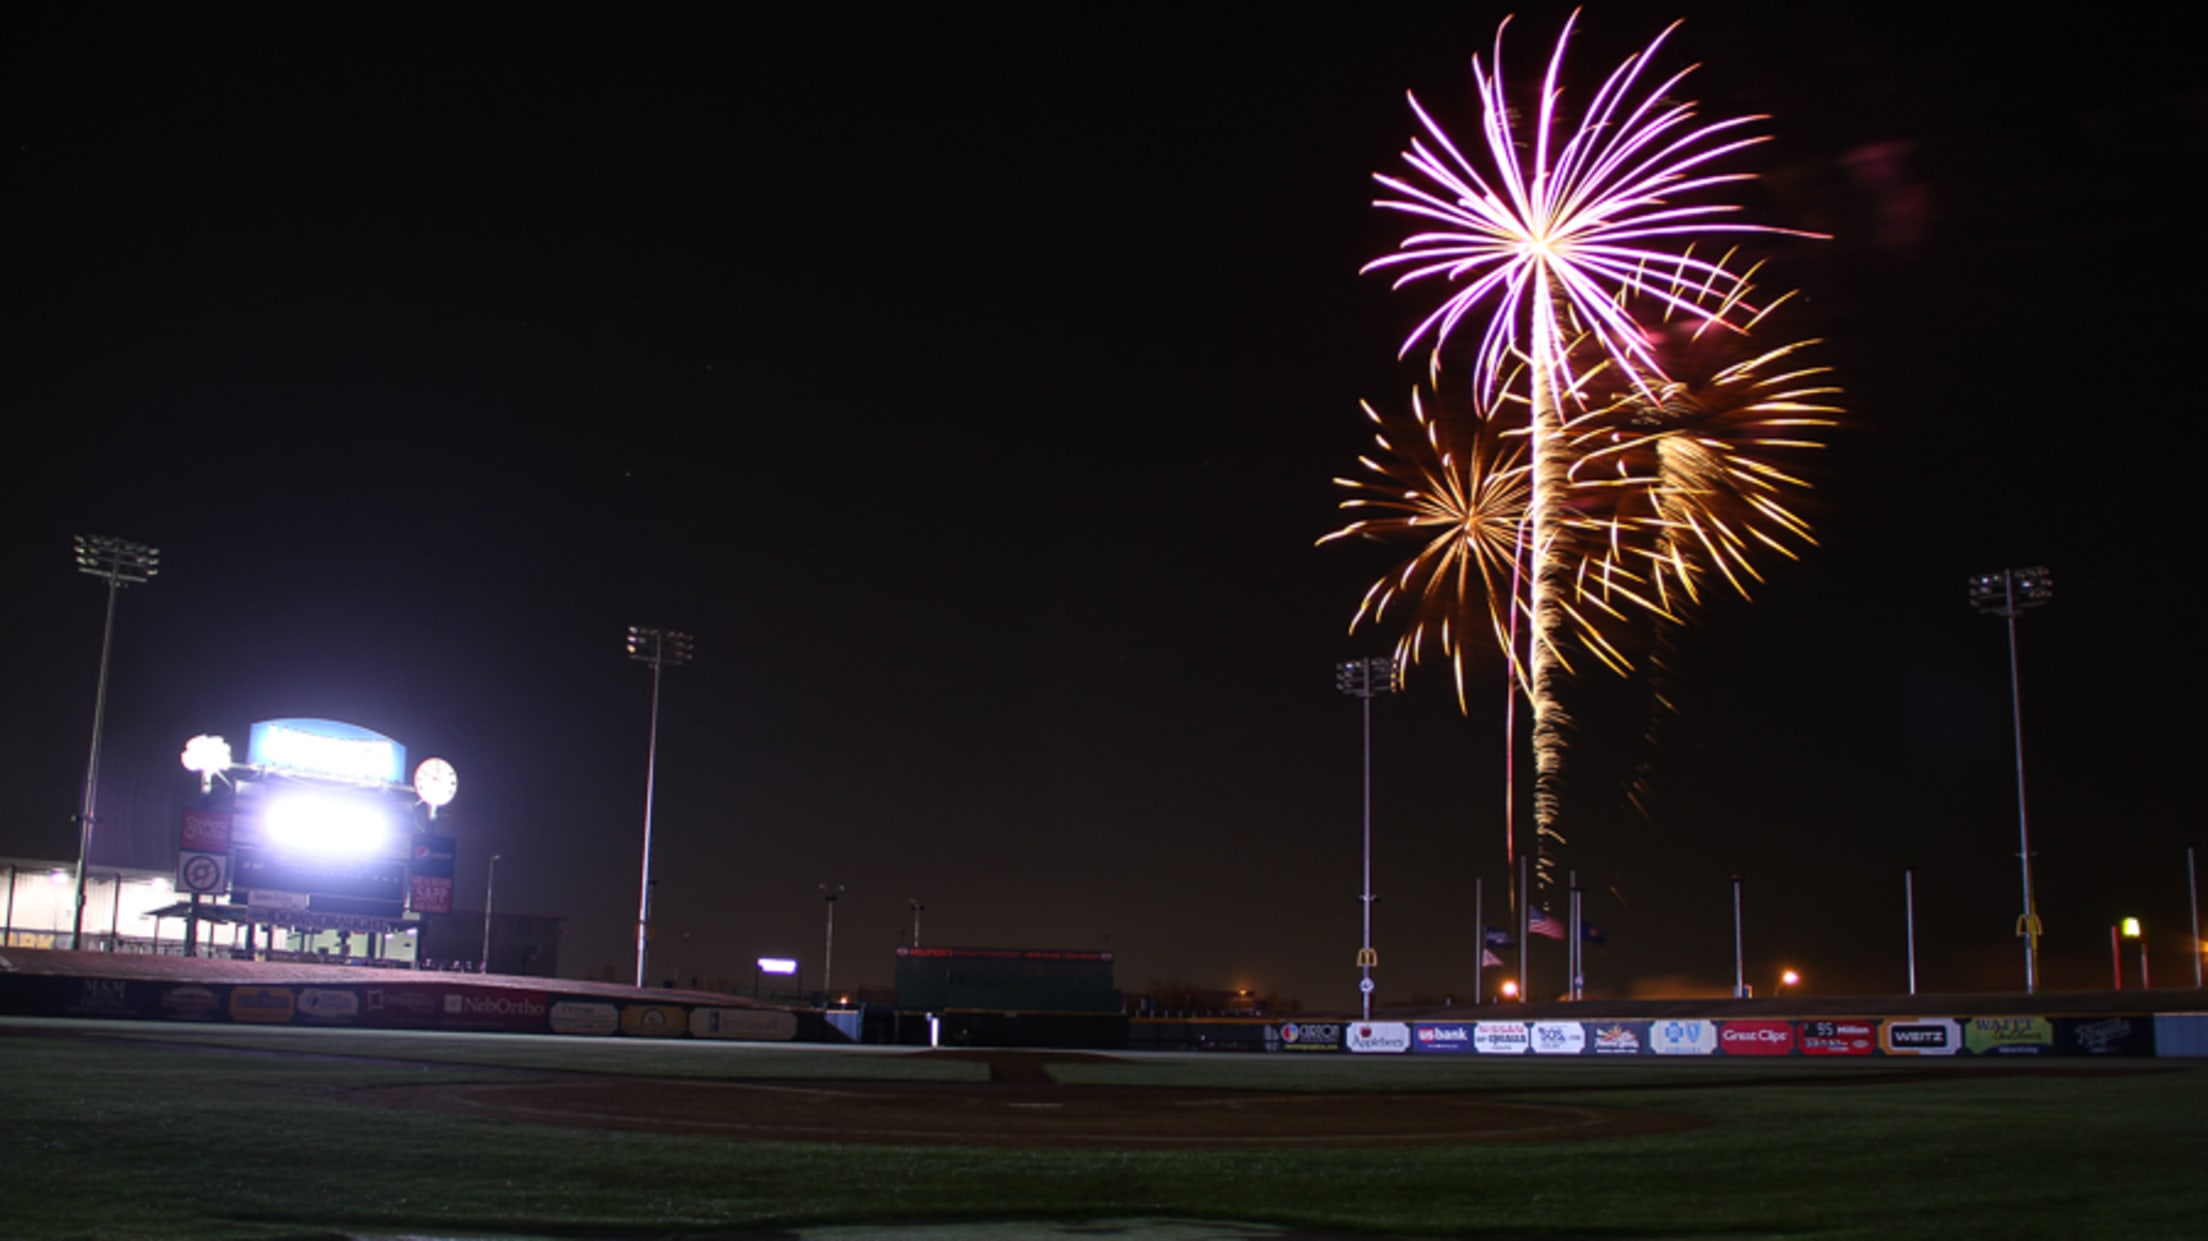 Storm Chasers welcome 4 millionth fan to Werner Park - Ballpark Digest